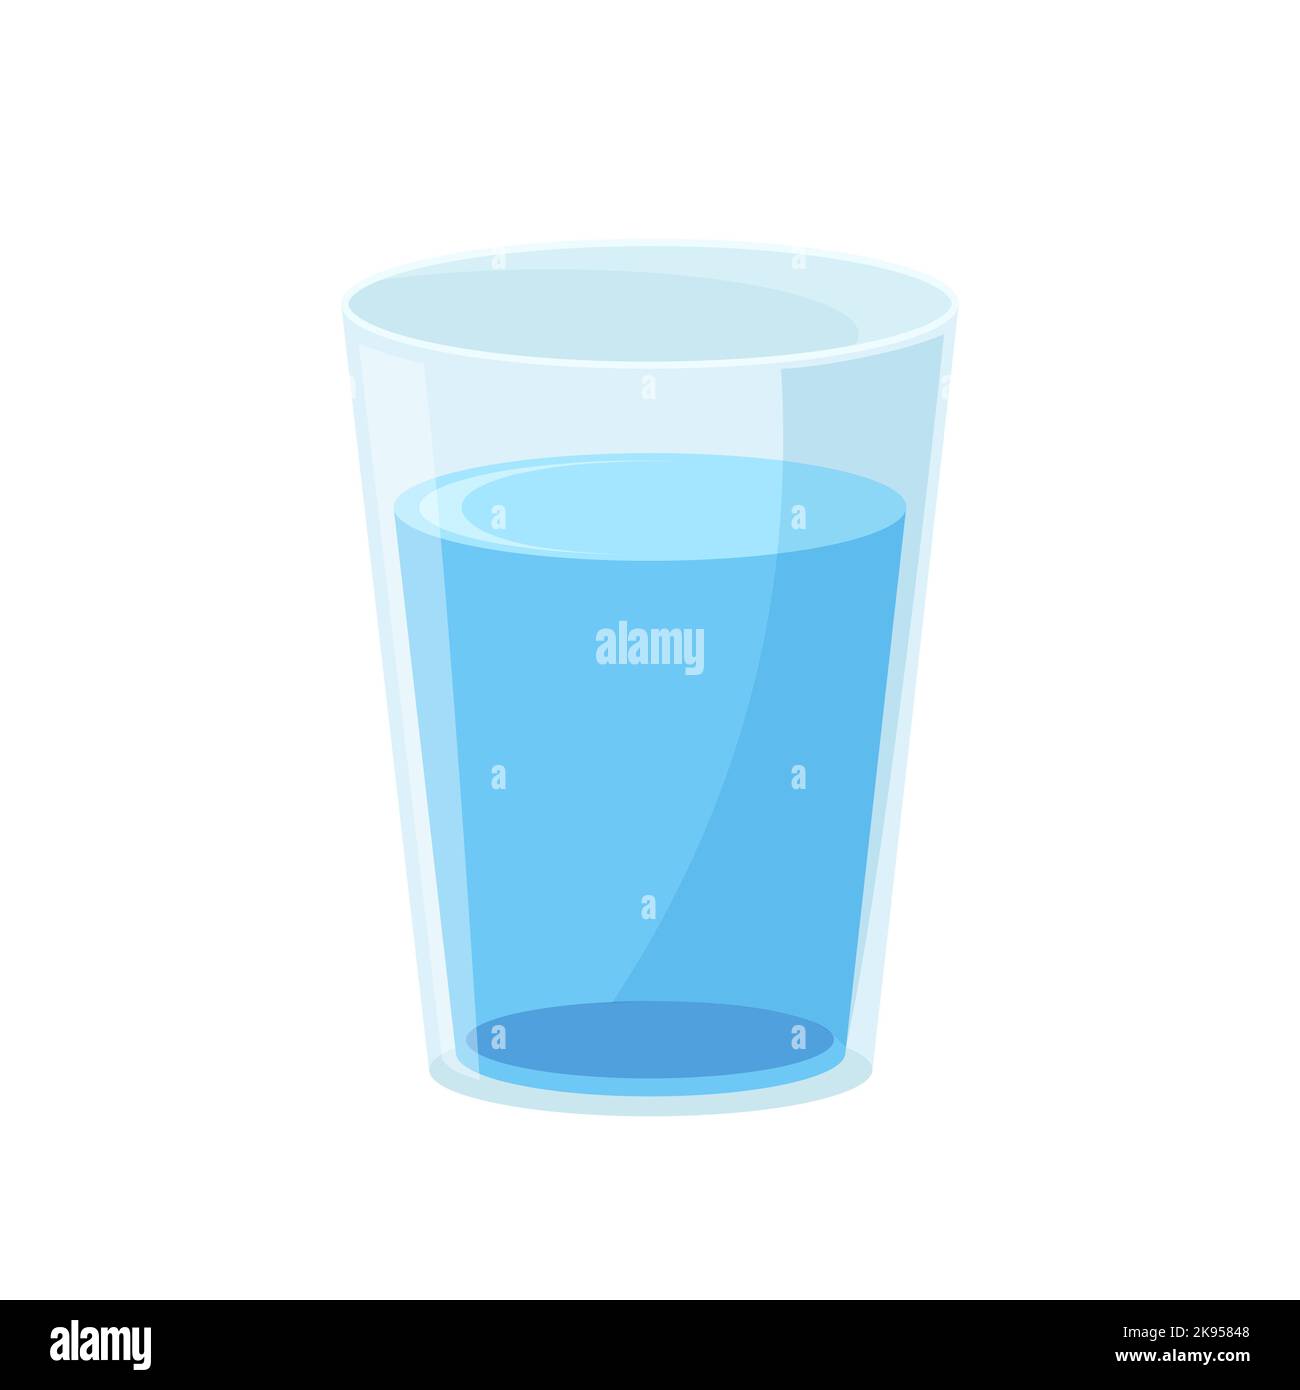 https://c8.alamy.com/comp/2K95848/glass-with-water-template-glass-transparent-cup-with-blue-refreshing-natural-liquid-2K95848.jpg